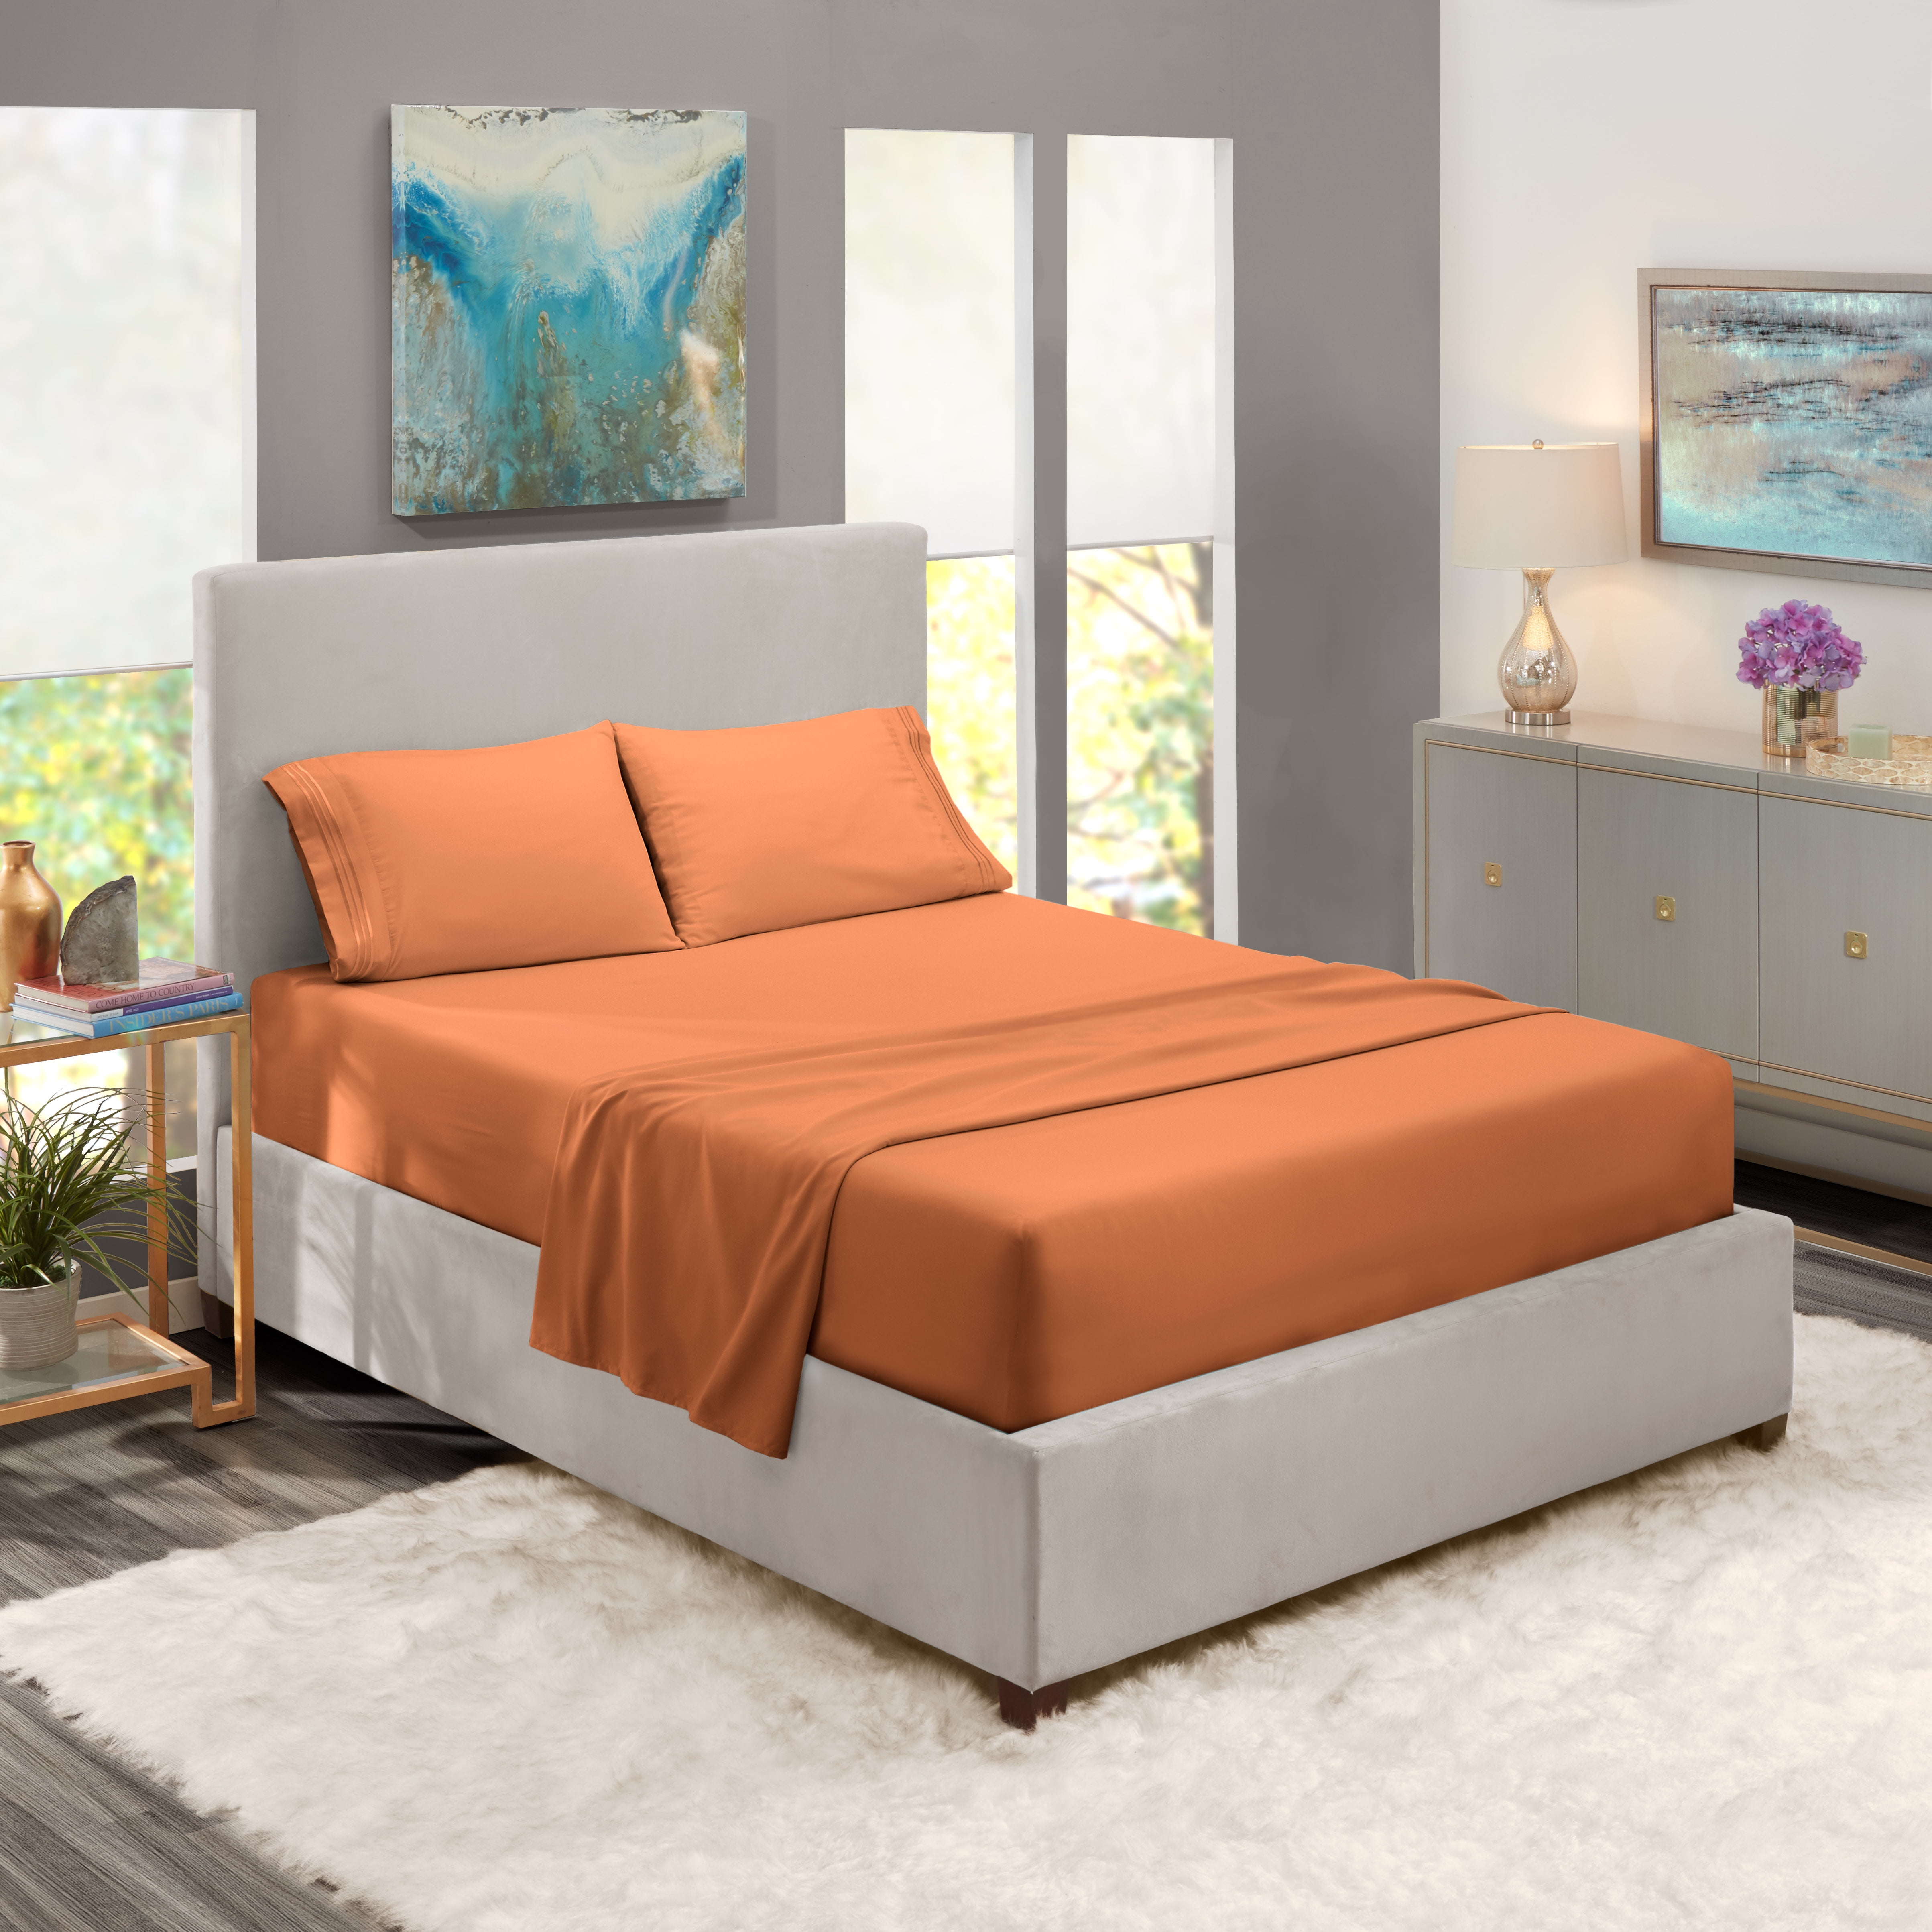 Queen Size Bed Sheets Set Rust Orange, Microfiber King Bed Sheets